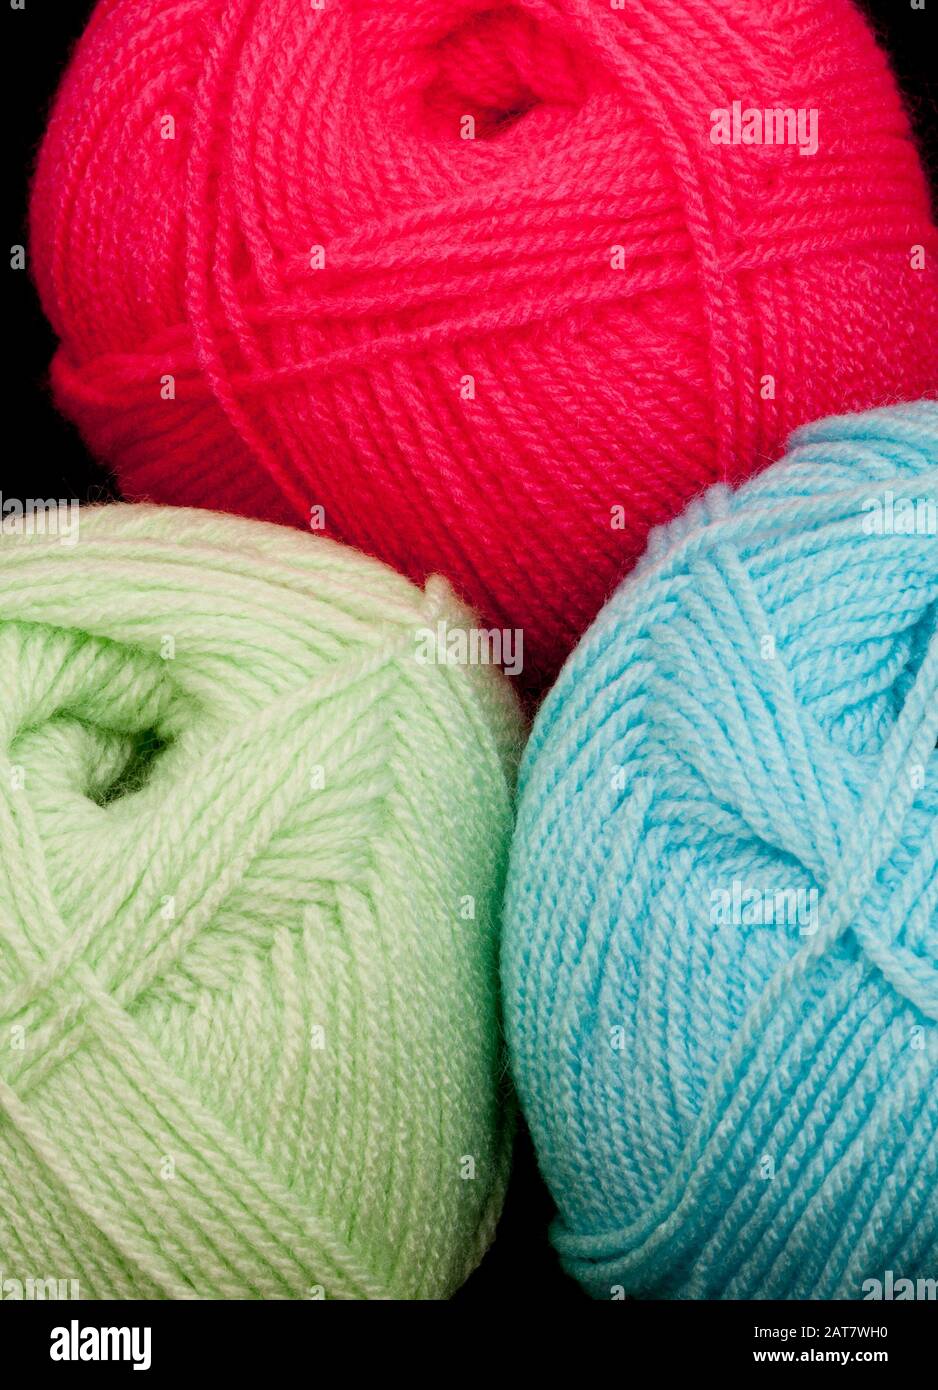 Balls of coloured wool Stock Photo